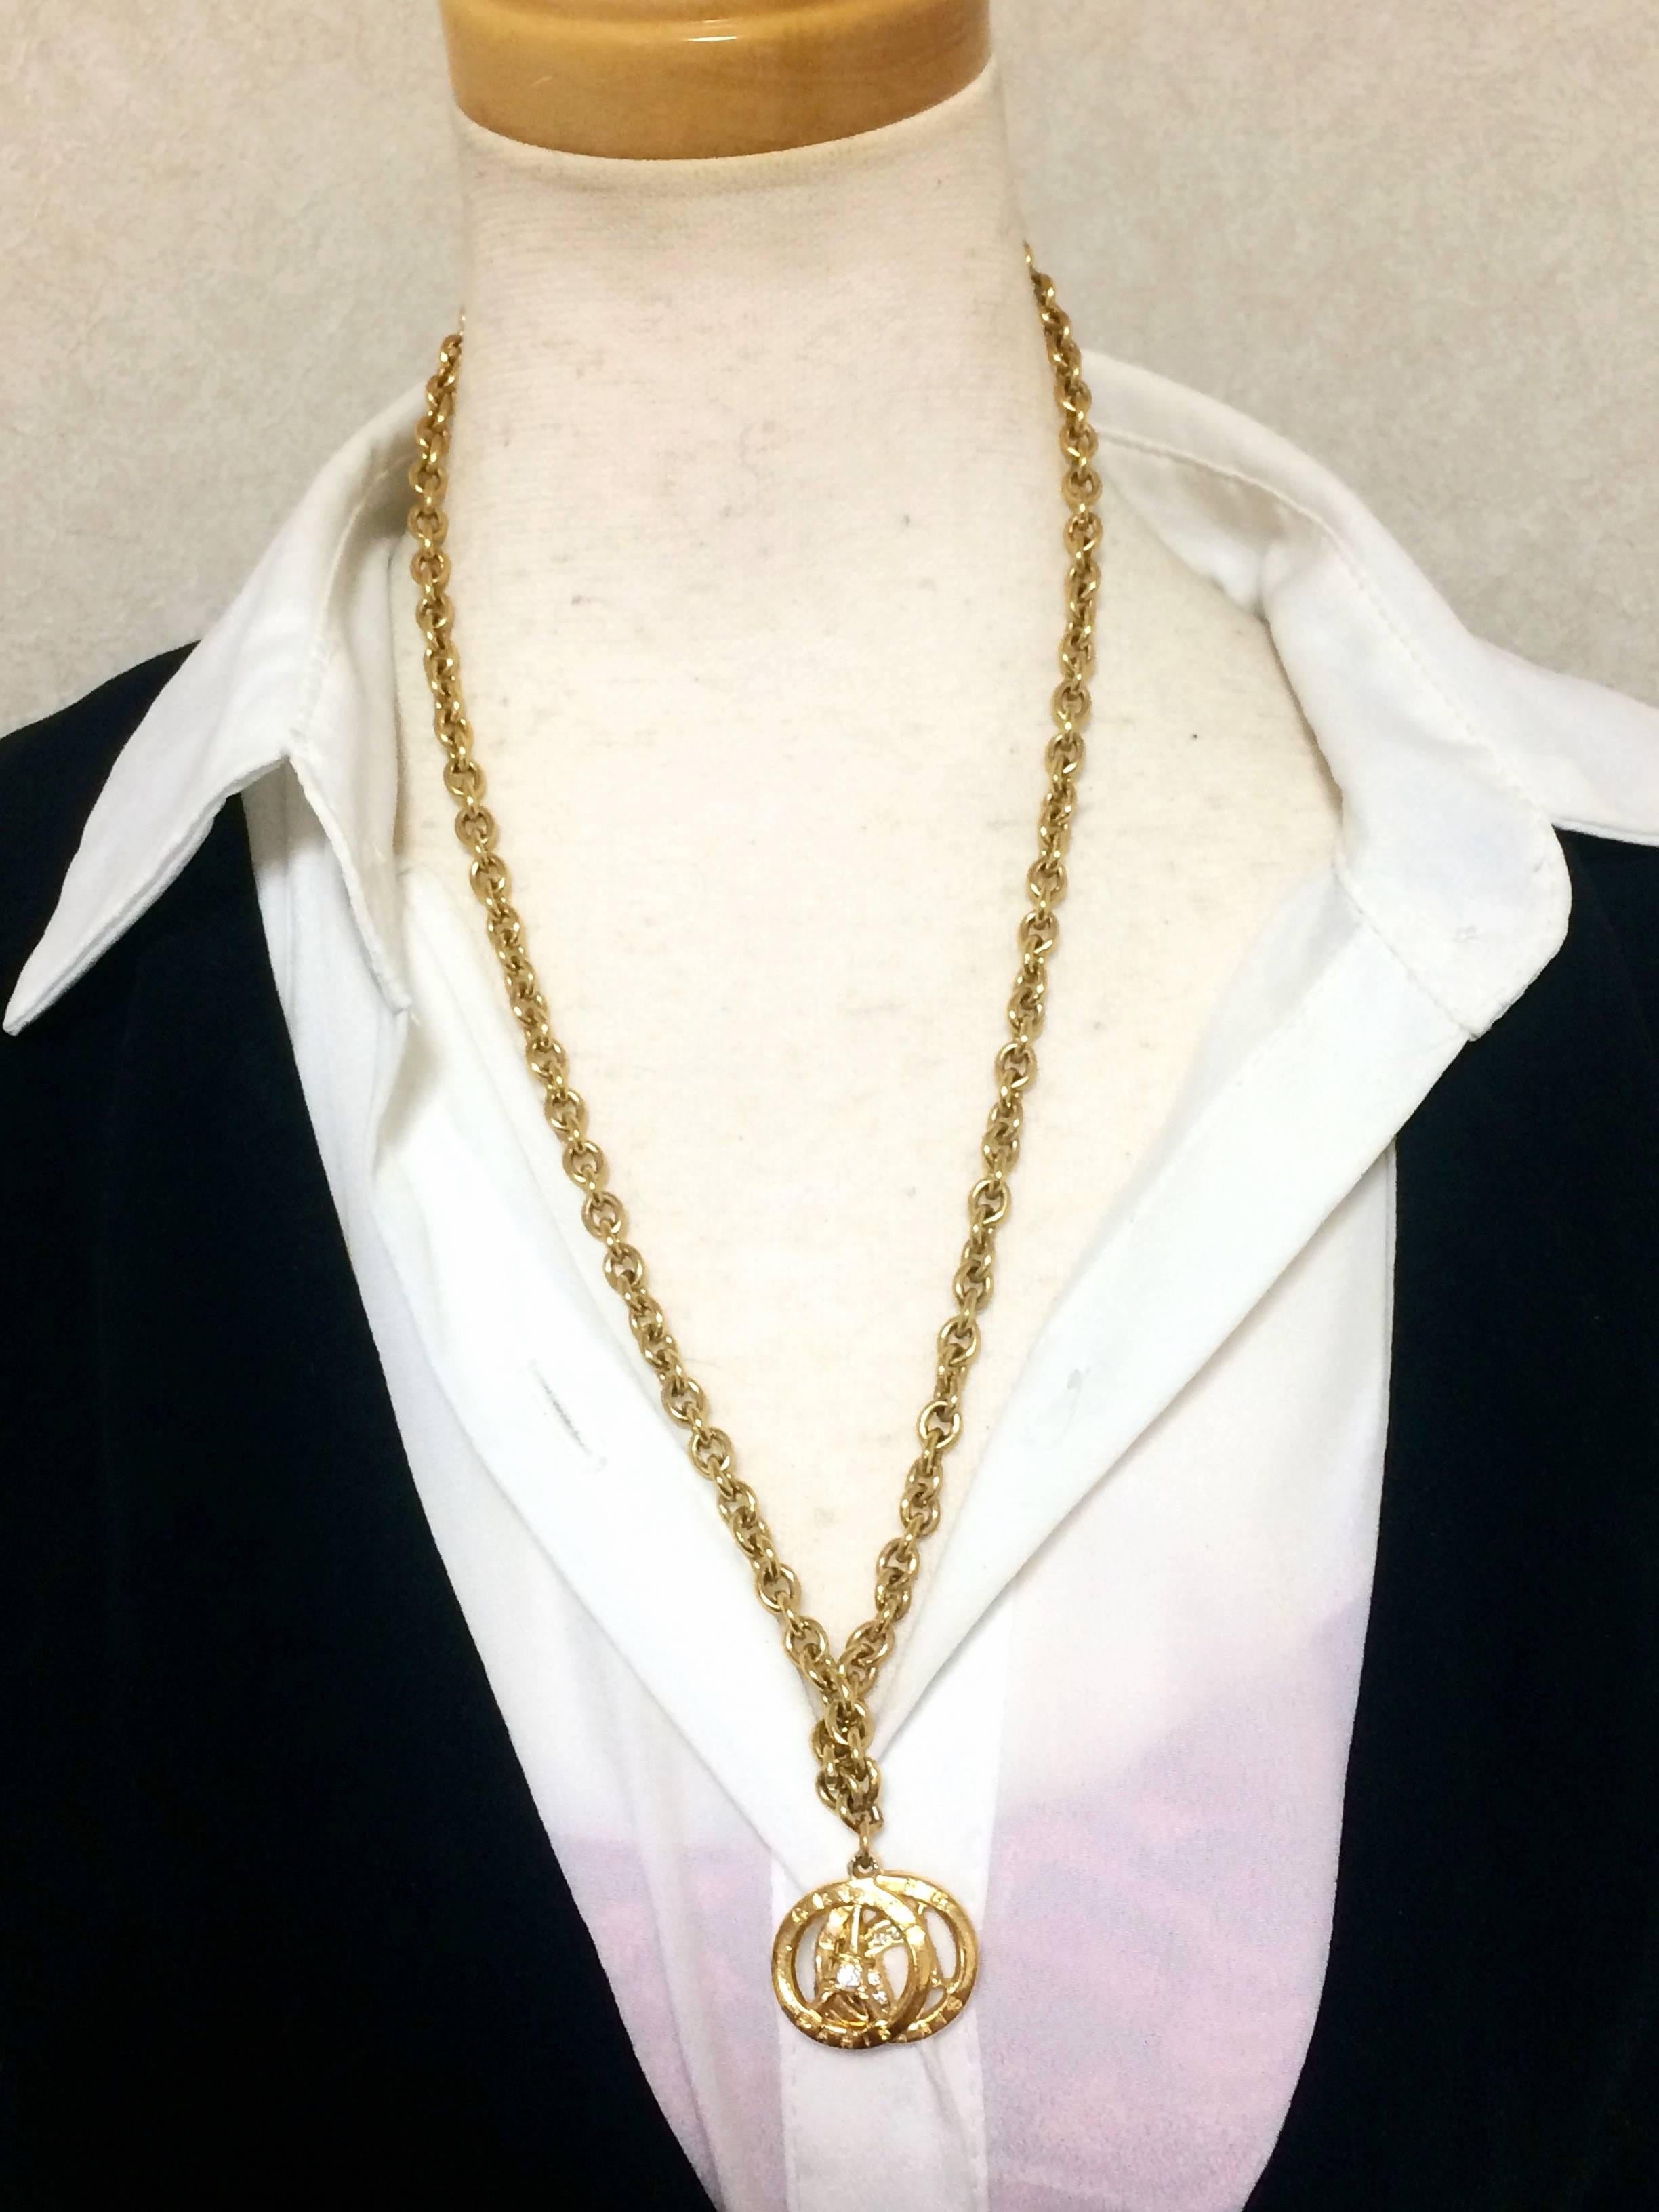 1990s. Vintage CELINE golden Eiffel tower and Triumphal arch pendant top chain necklace. Perfect jewelry. Made in France.

Elegant and Gorgeous jewelry from CELINE! Shining beautifully.
Great gift idea. 
Vintage Celine gold tone chain necklace with